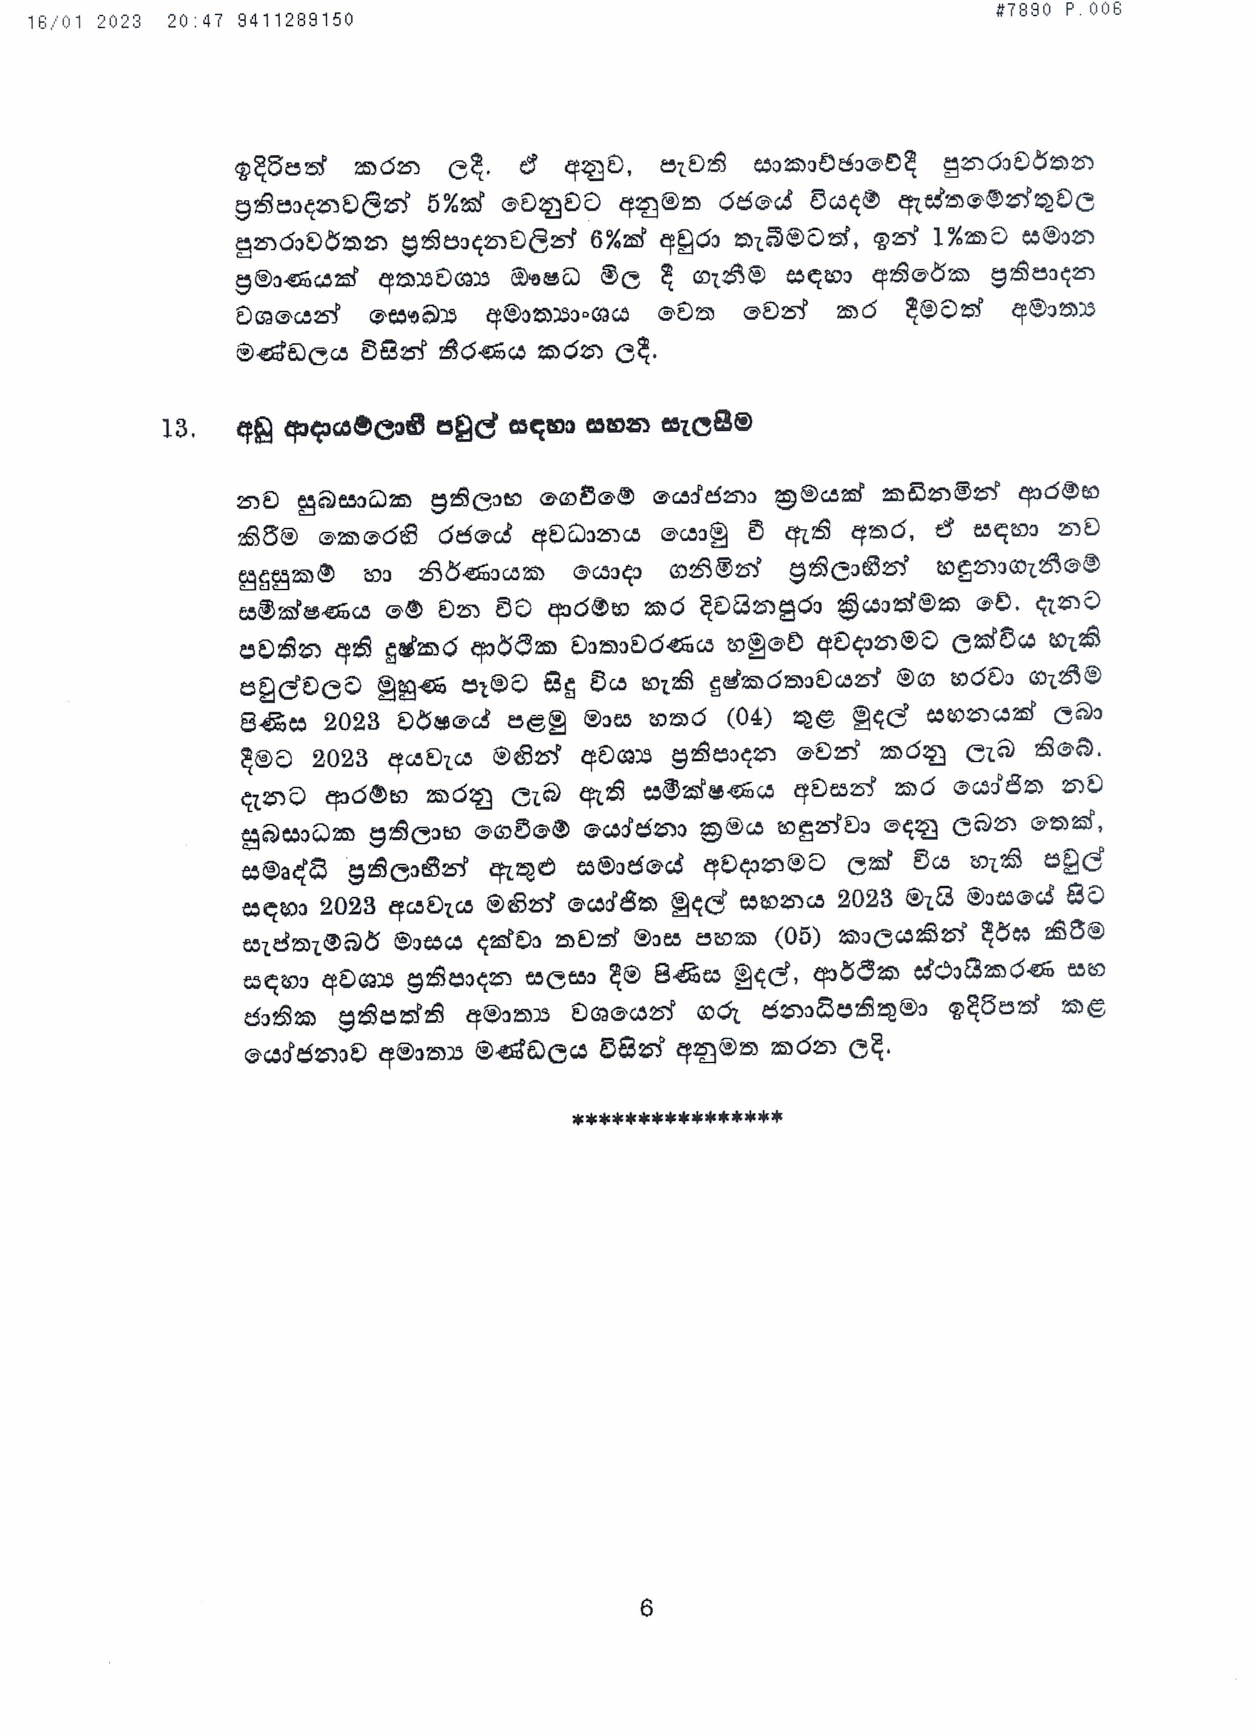 Cabinet Decision on 16.01.2023 page 0006